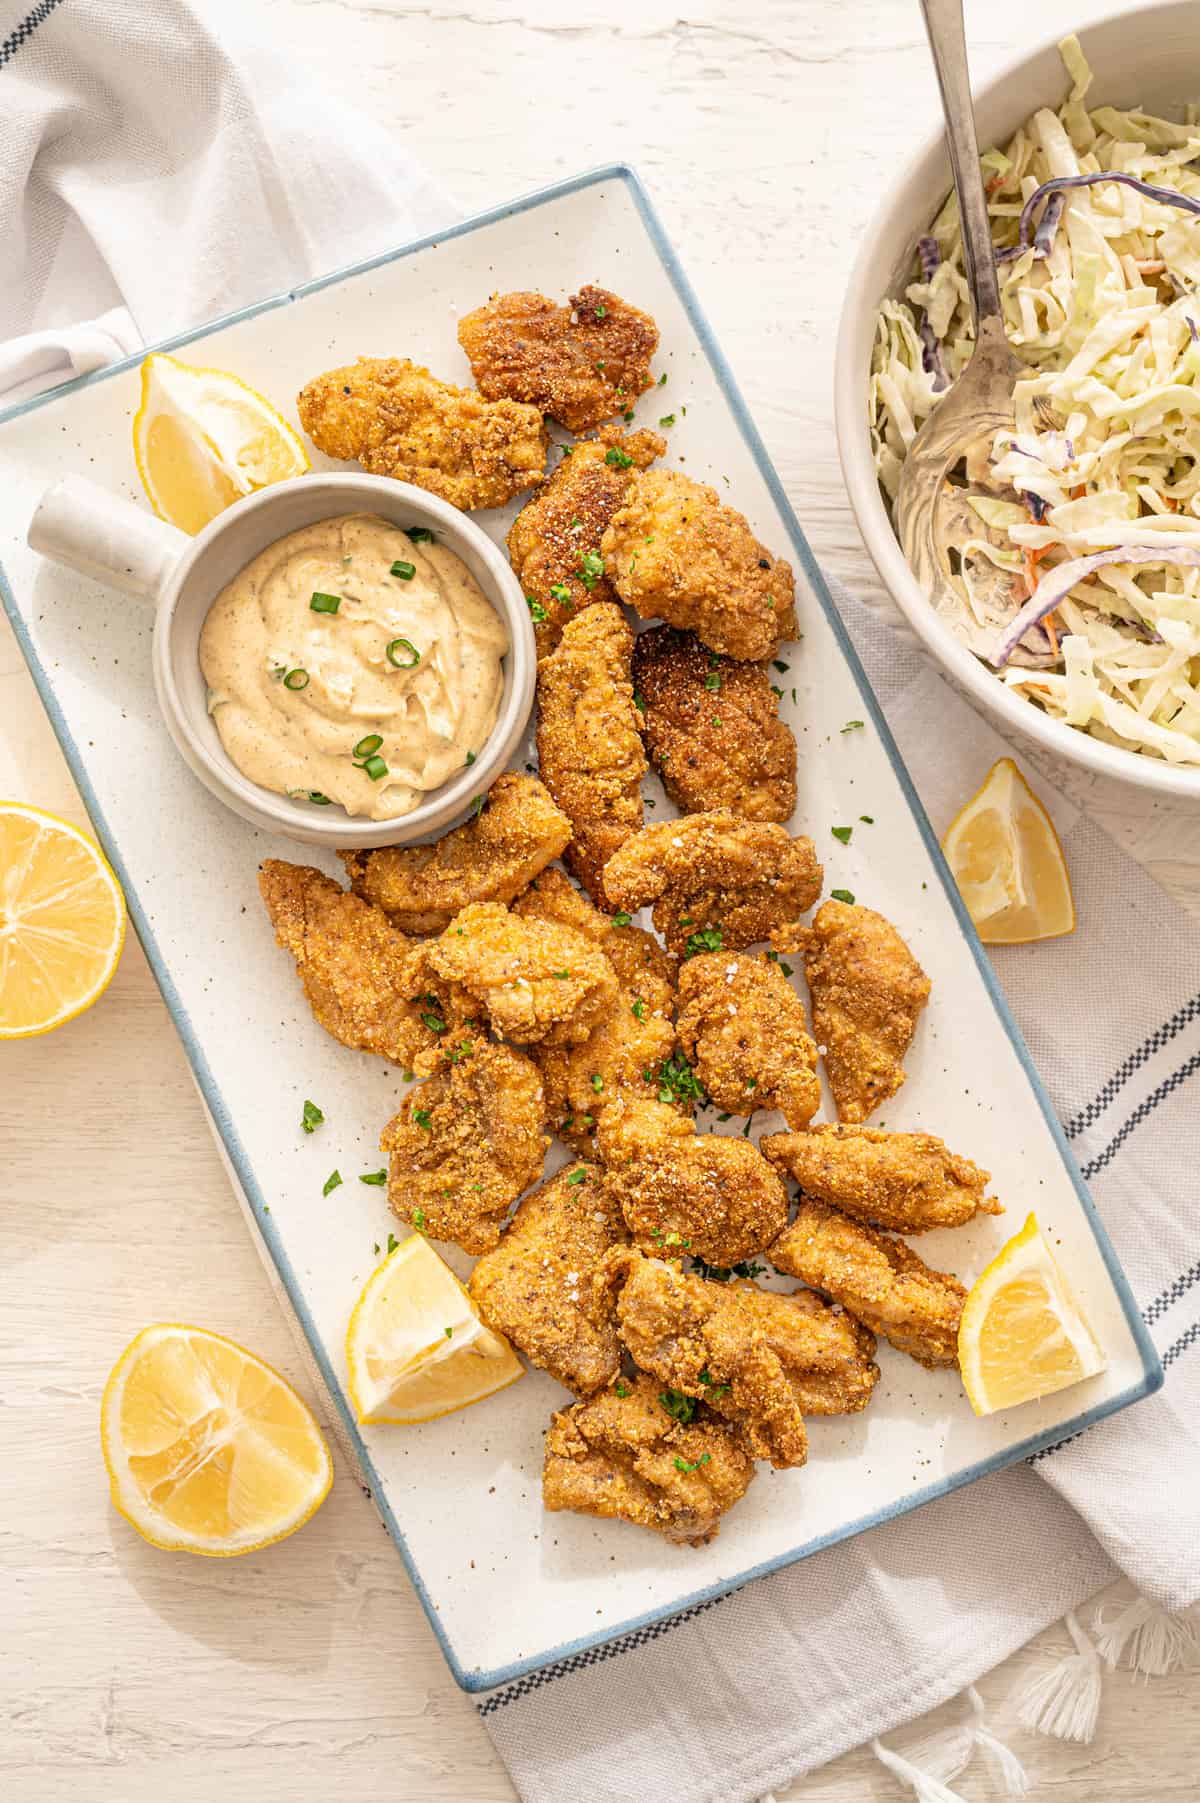 Fried catfish nuggets on a platter with lemons and remoulade sauce with coleslaw on the side.